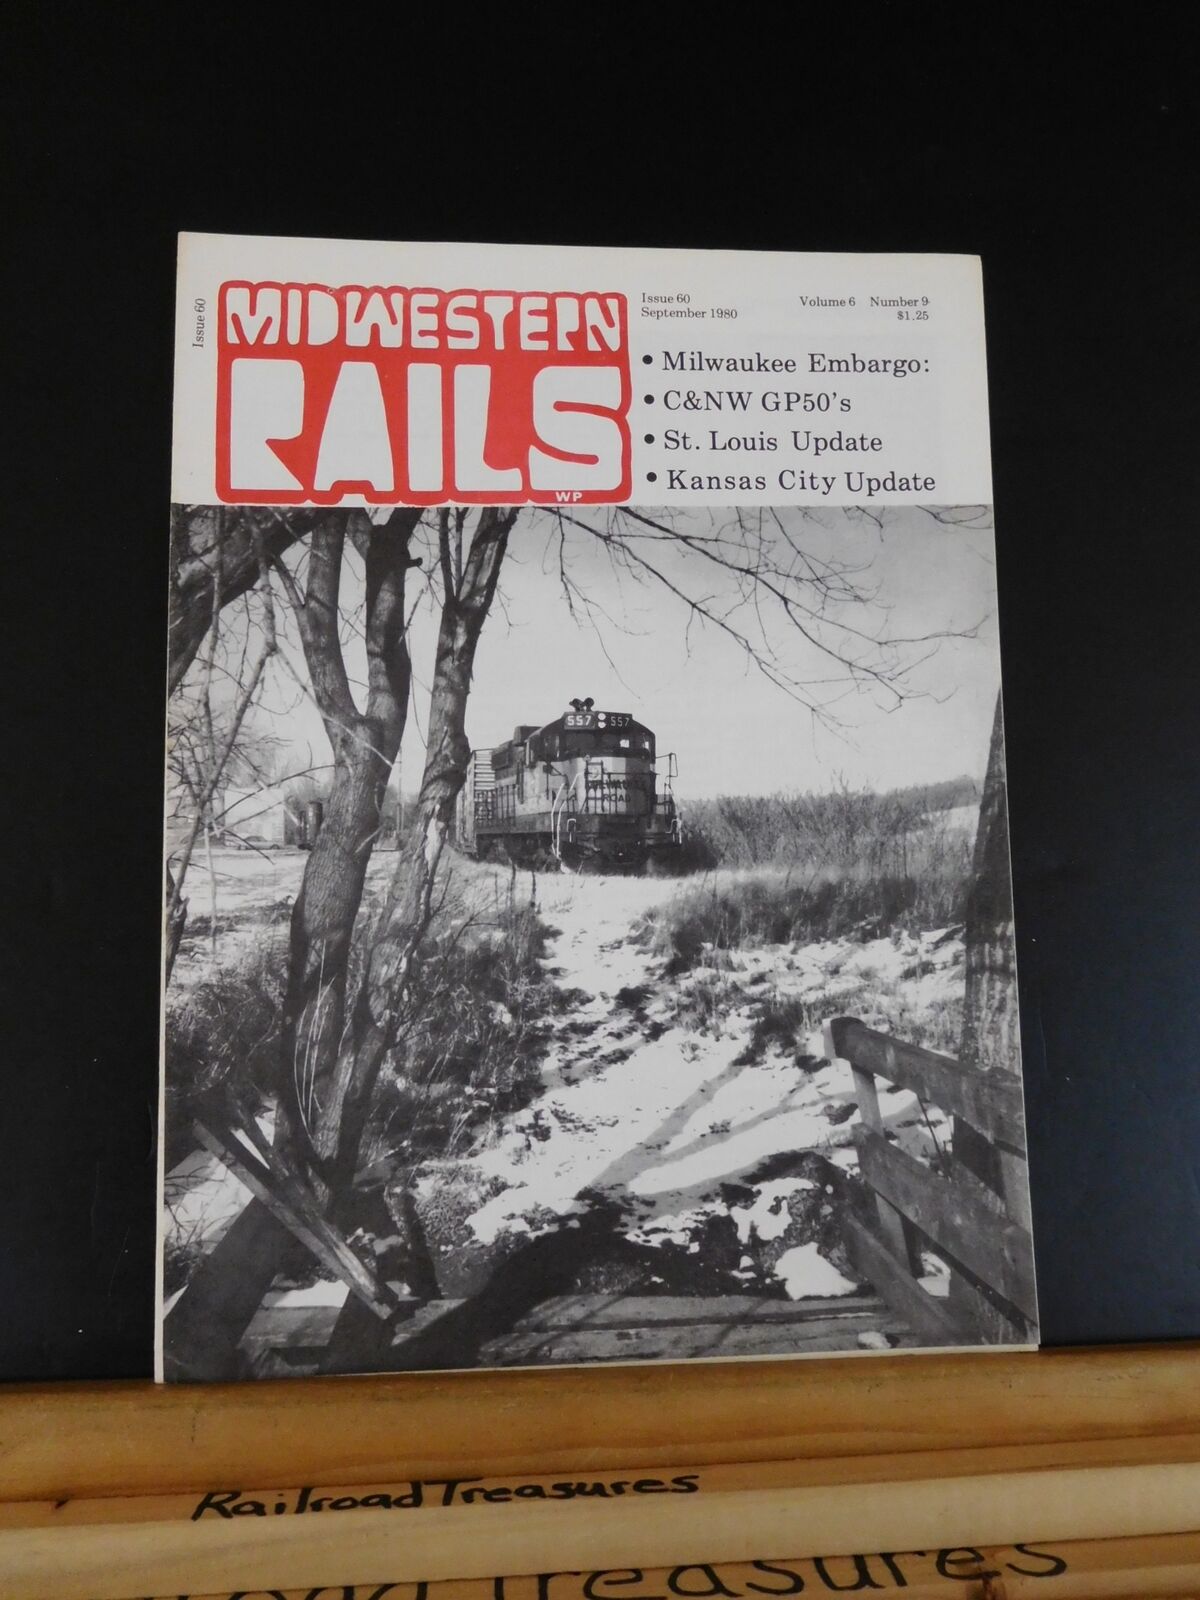 Midwestern Rails 1980 September Vol.6 No.9 Issuse 60 Milw embargo C&NW GP50s